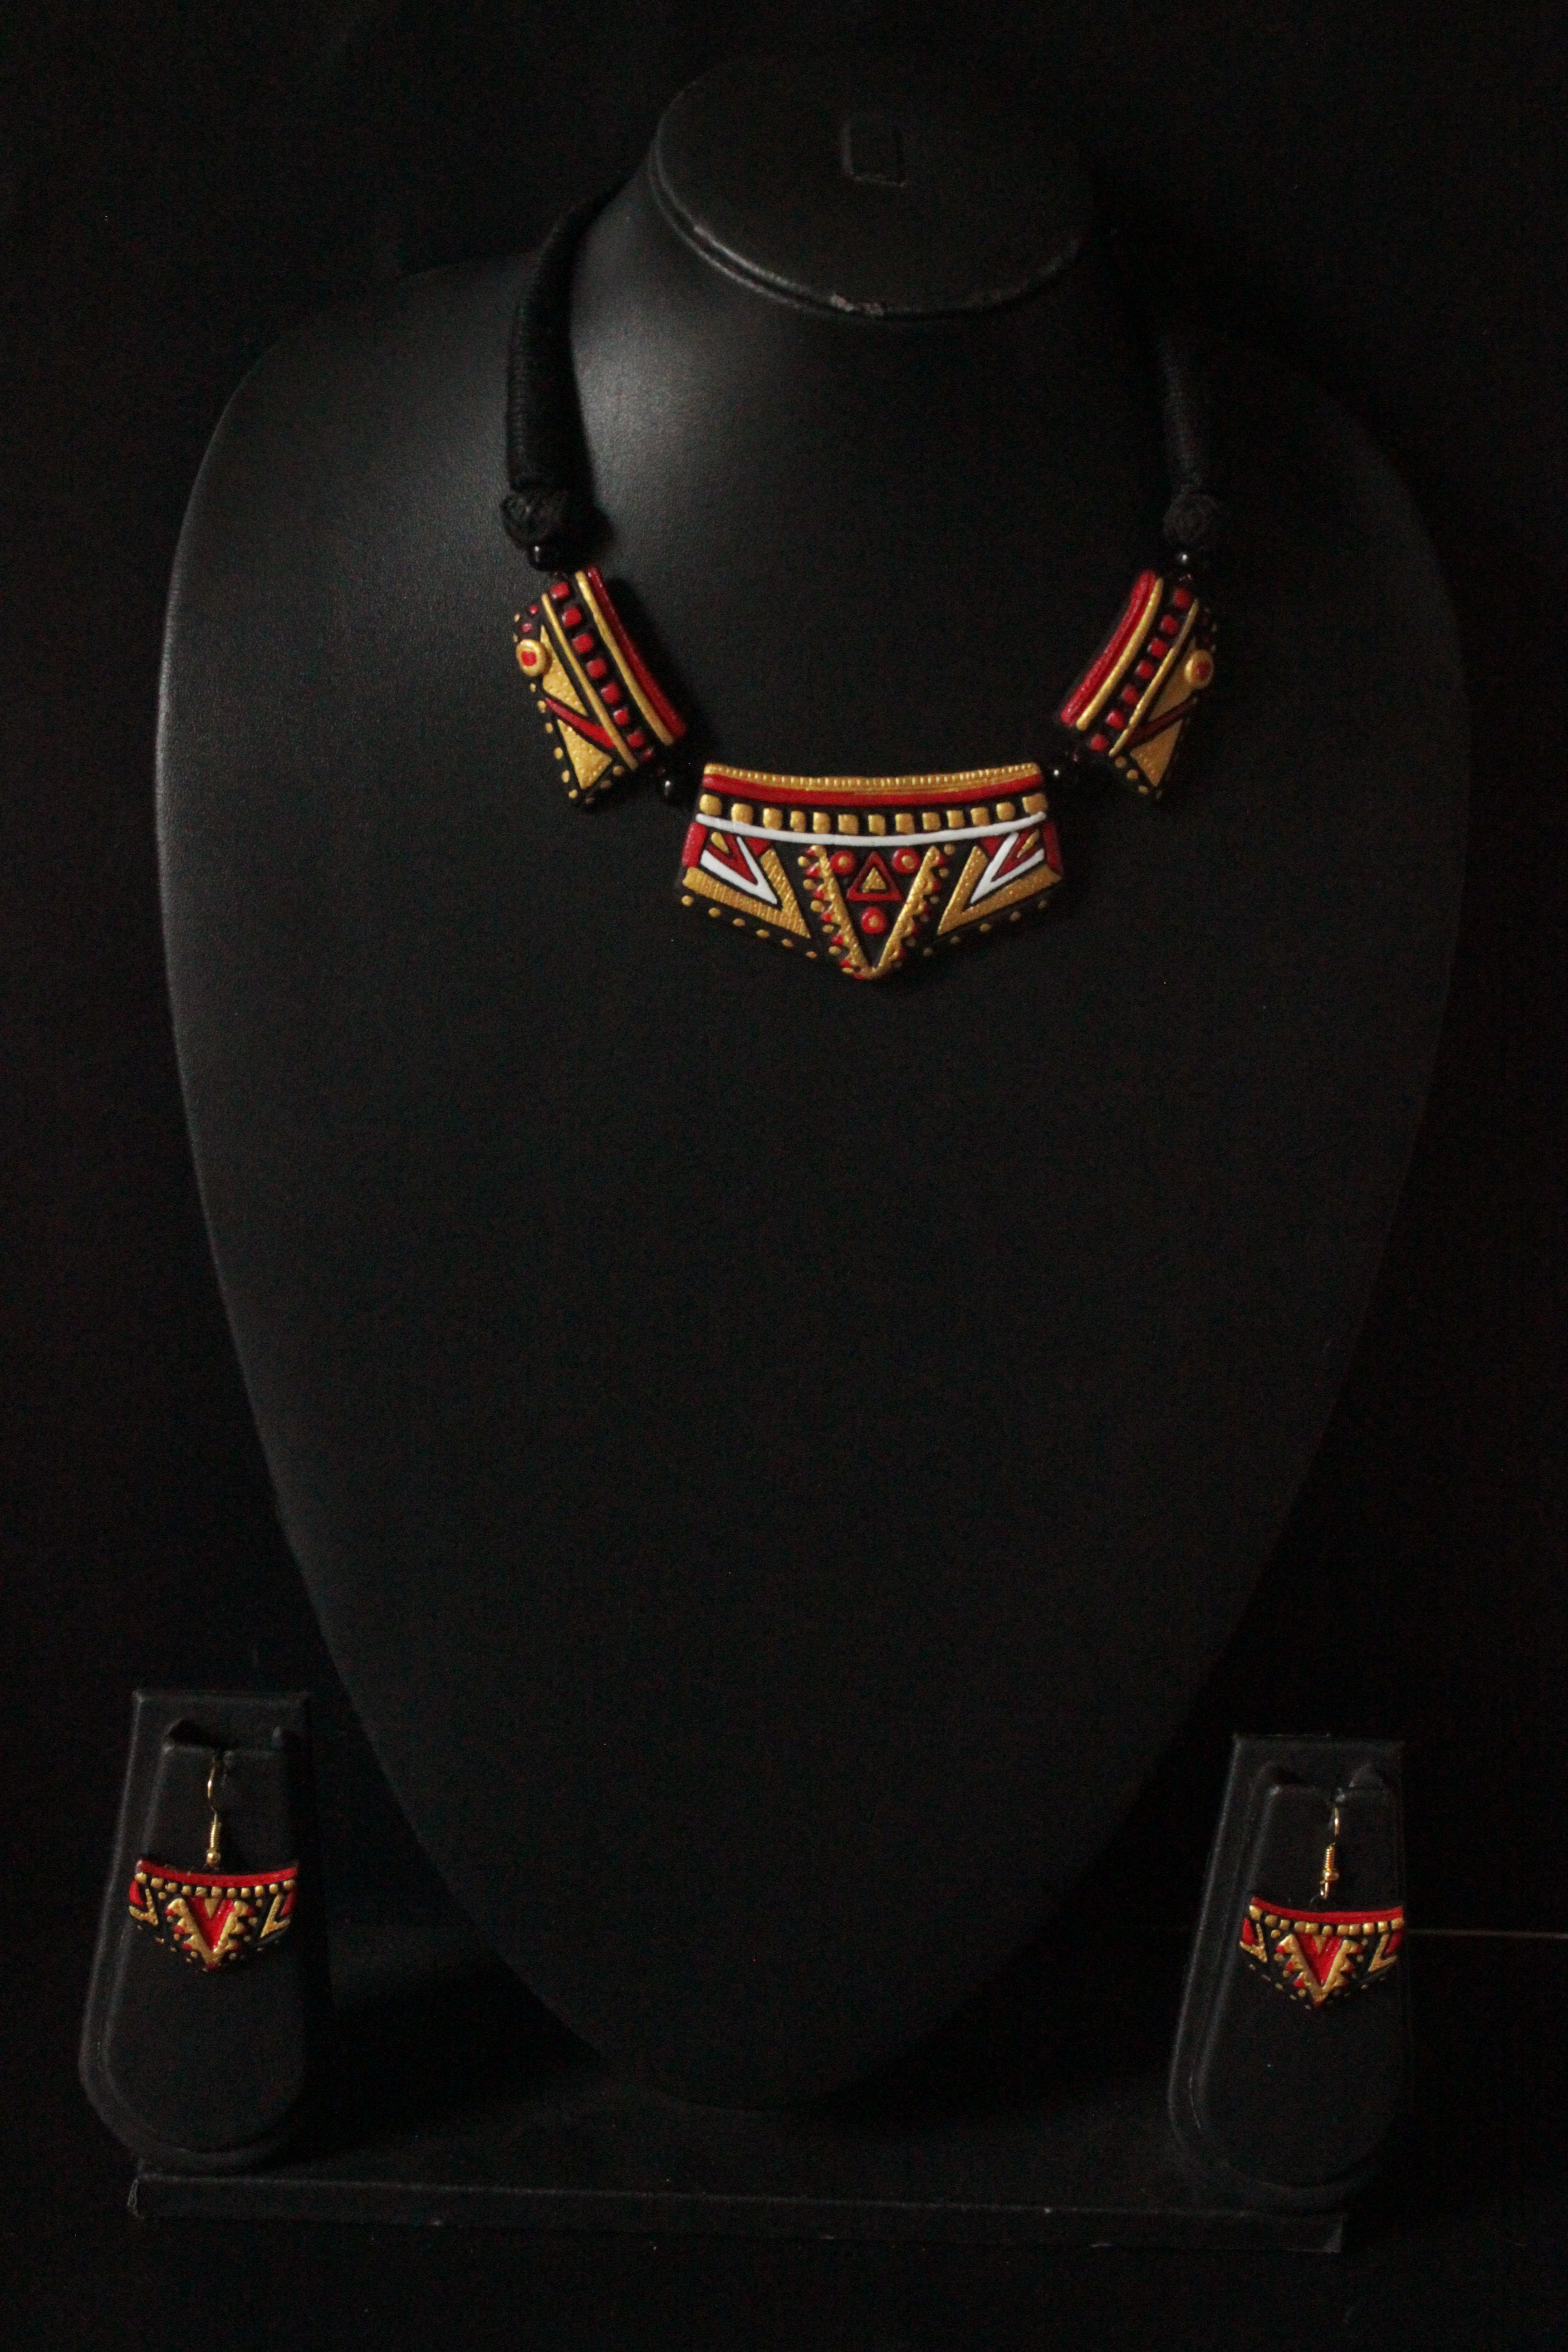 Elegant Black & Golden Handcrafted Terracotta Clay Necklace Set with Thread Closure